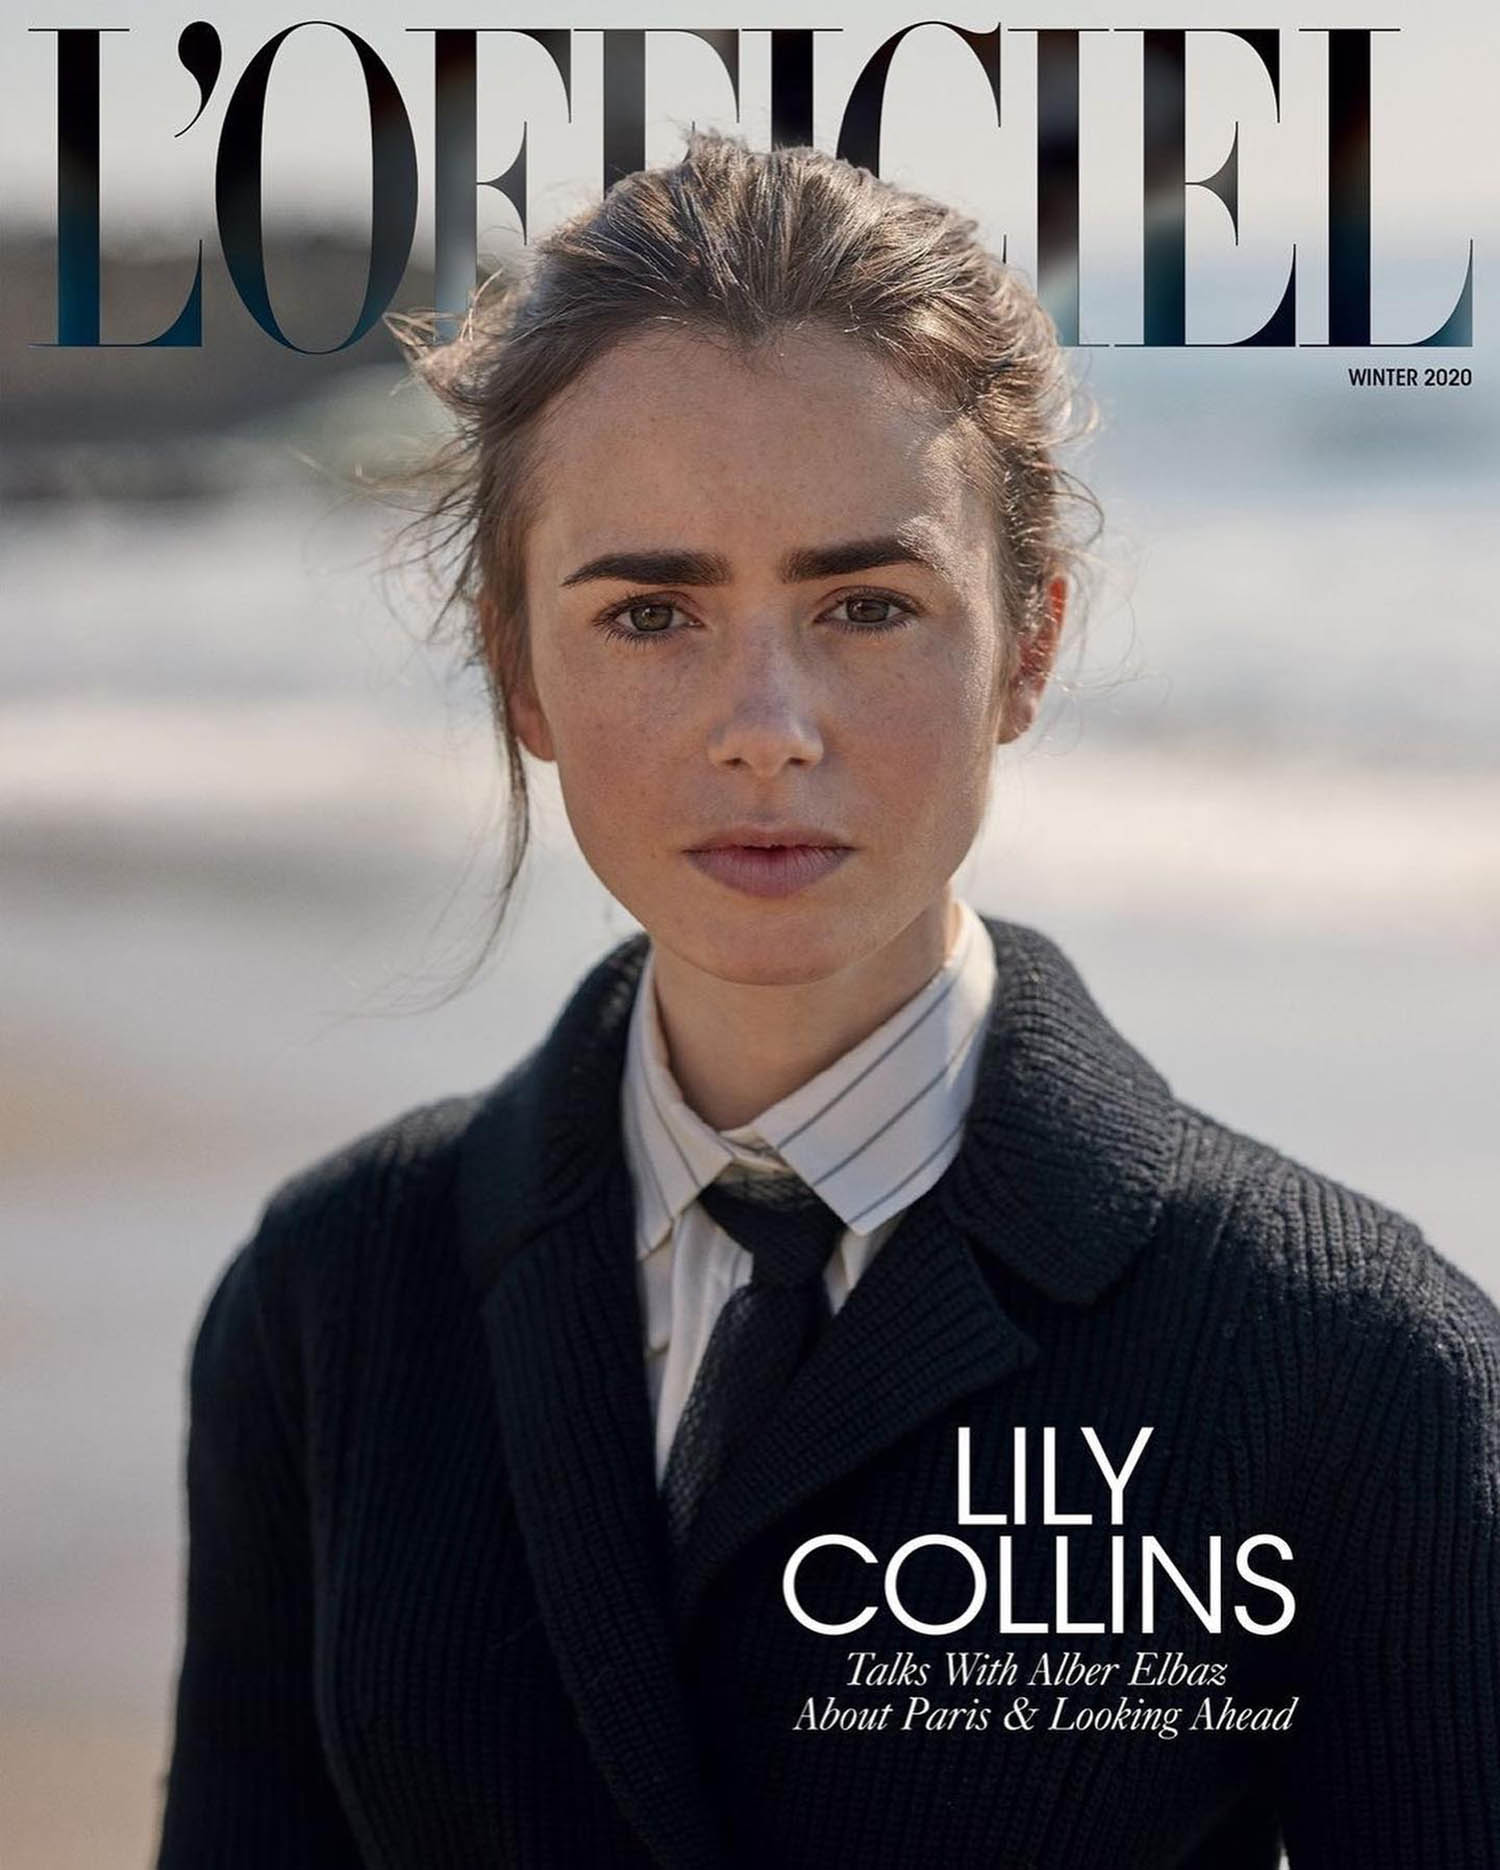 Lily Collins covers L'Officiel Global Winter 2020 by Sam Taylor Johnson